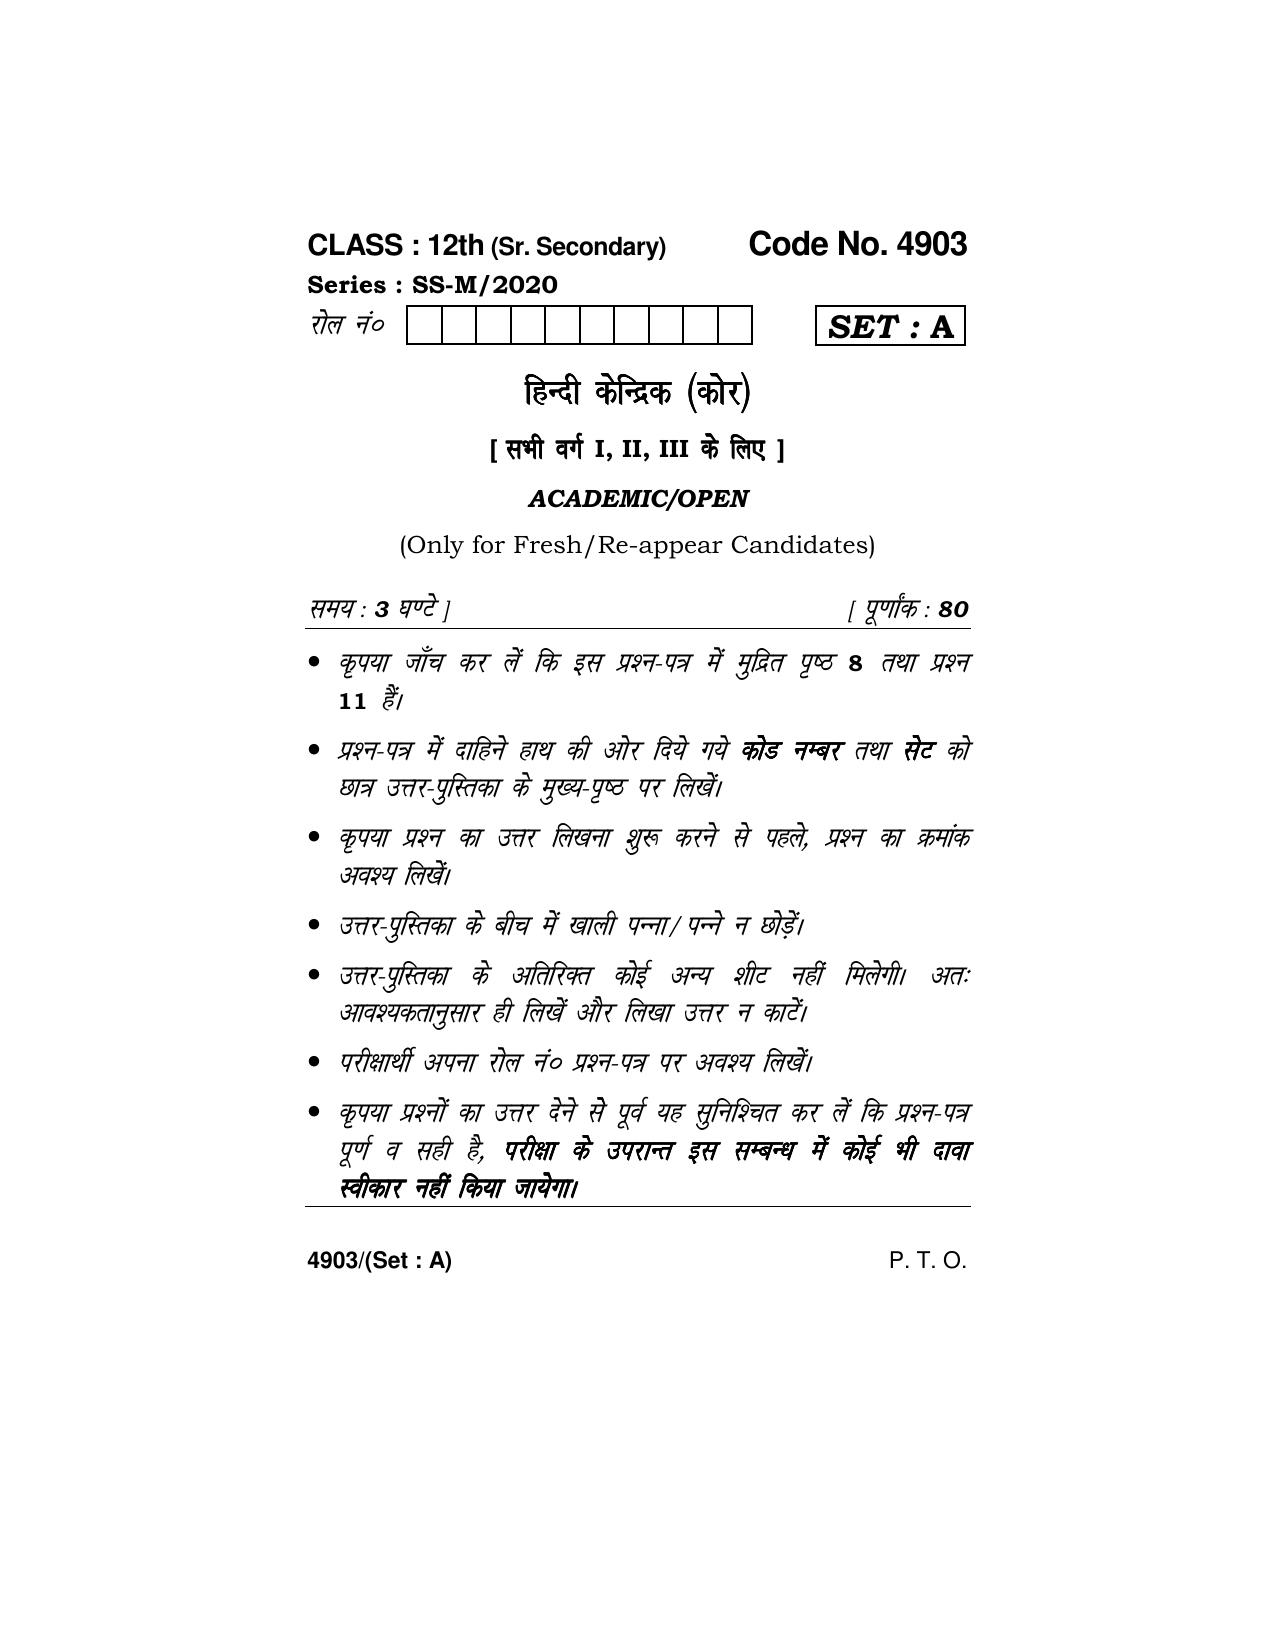 Haryana Board HBSE Class 12 Hindi Core 2020 Question Paper - Page 1